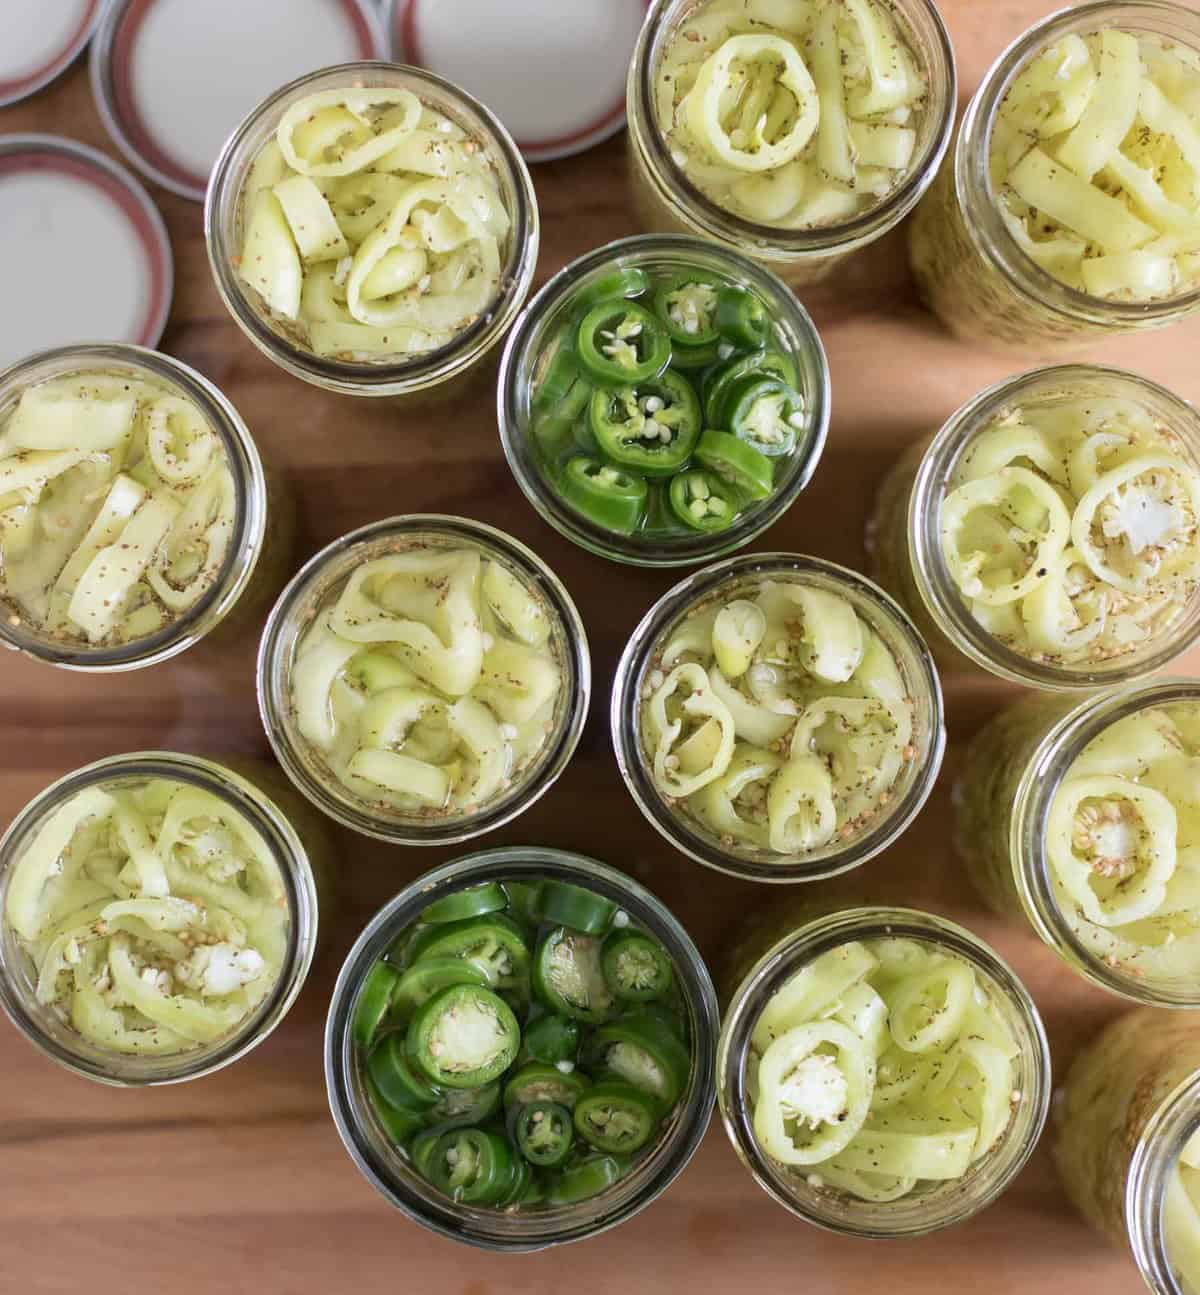 A quick and easy guide on how to pickle peppers using a hot water bath canning method which produces shelf-stable pickled peppers you can eat all winter long.